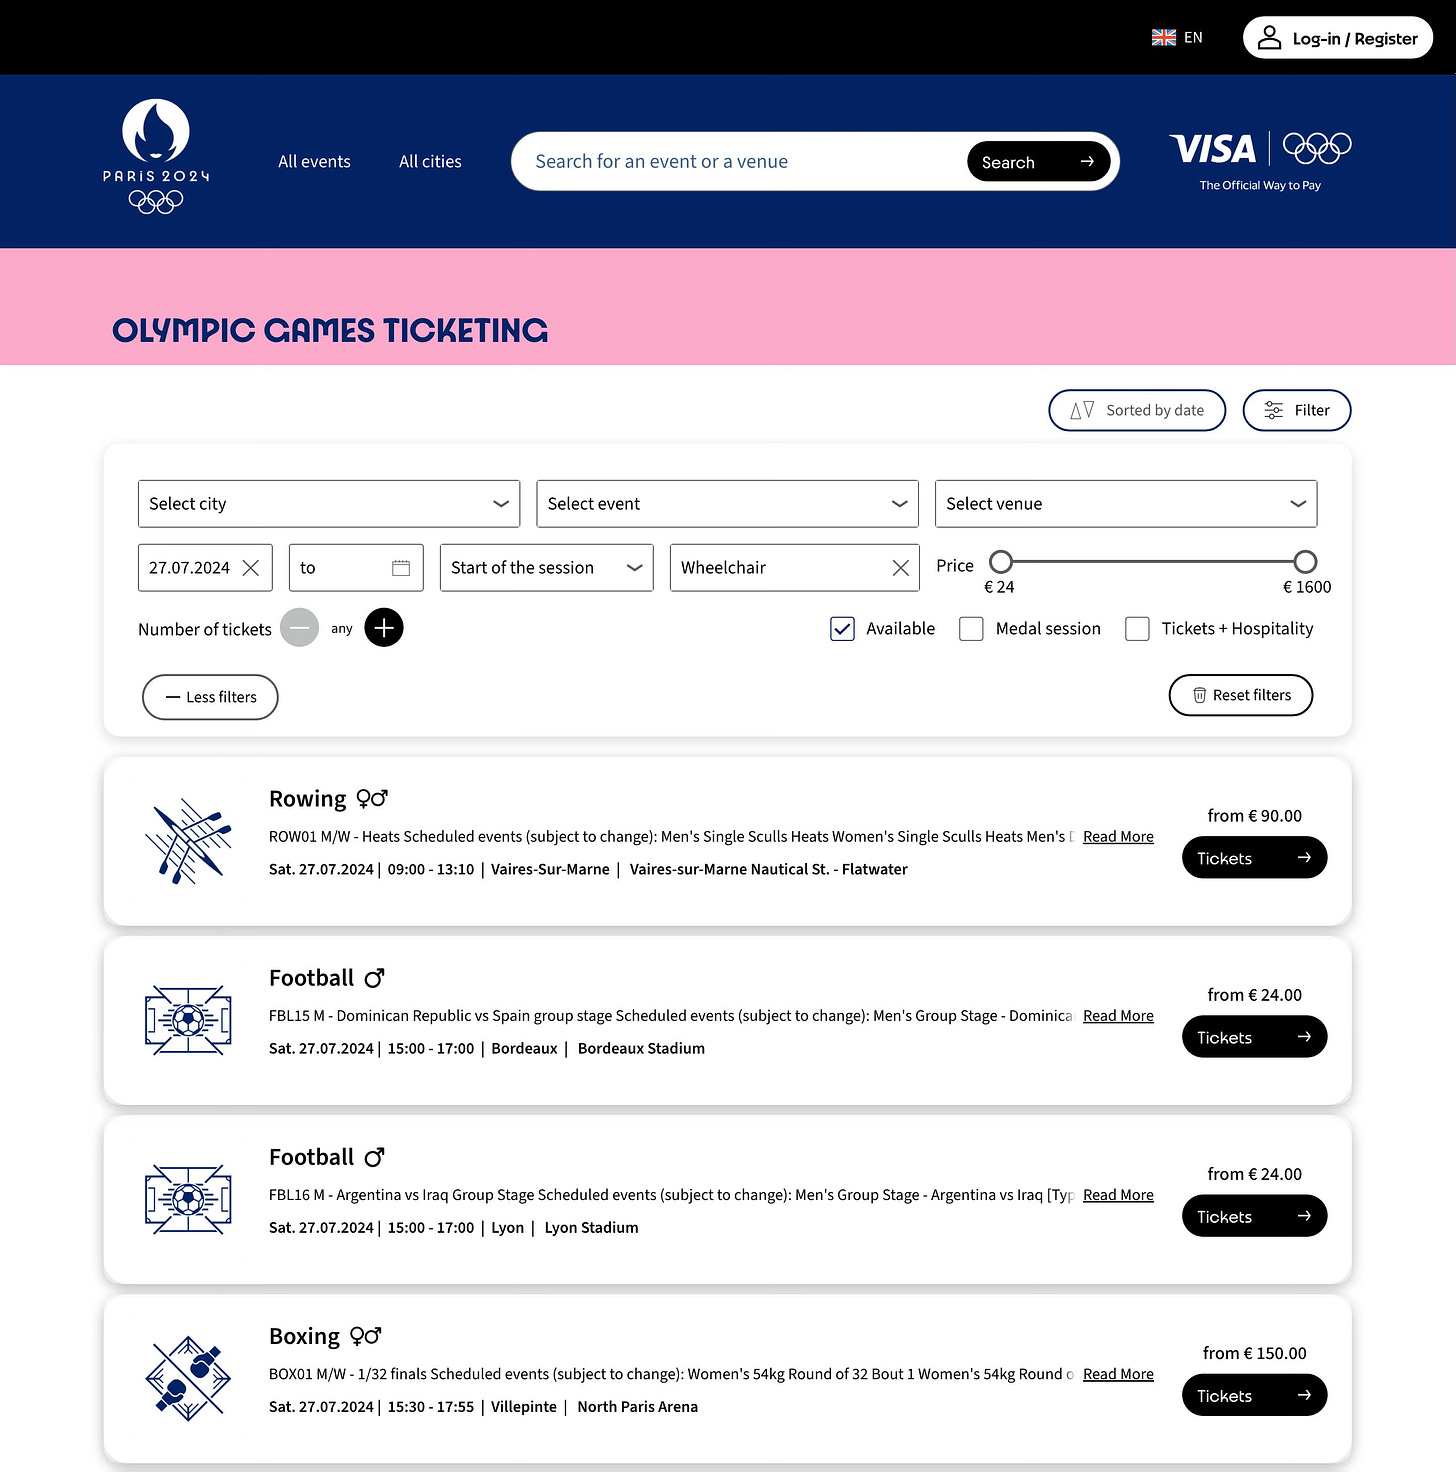 Screenshot of Olympics website with web search form for events and tickets.